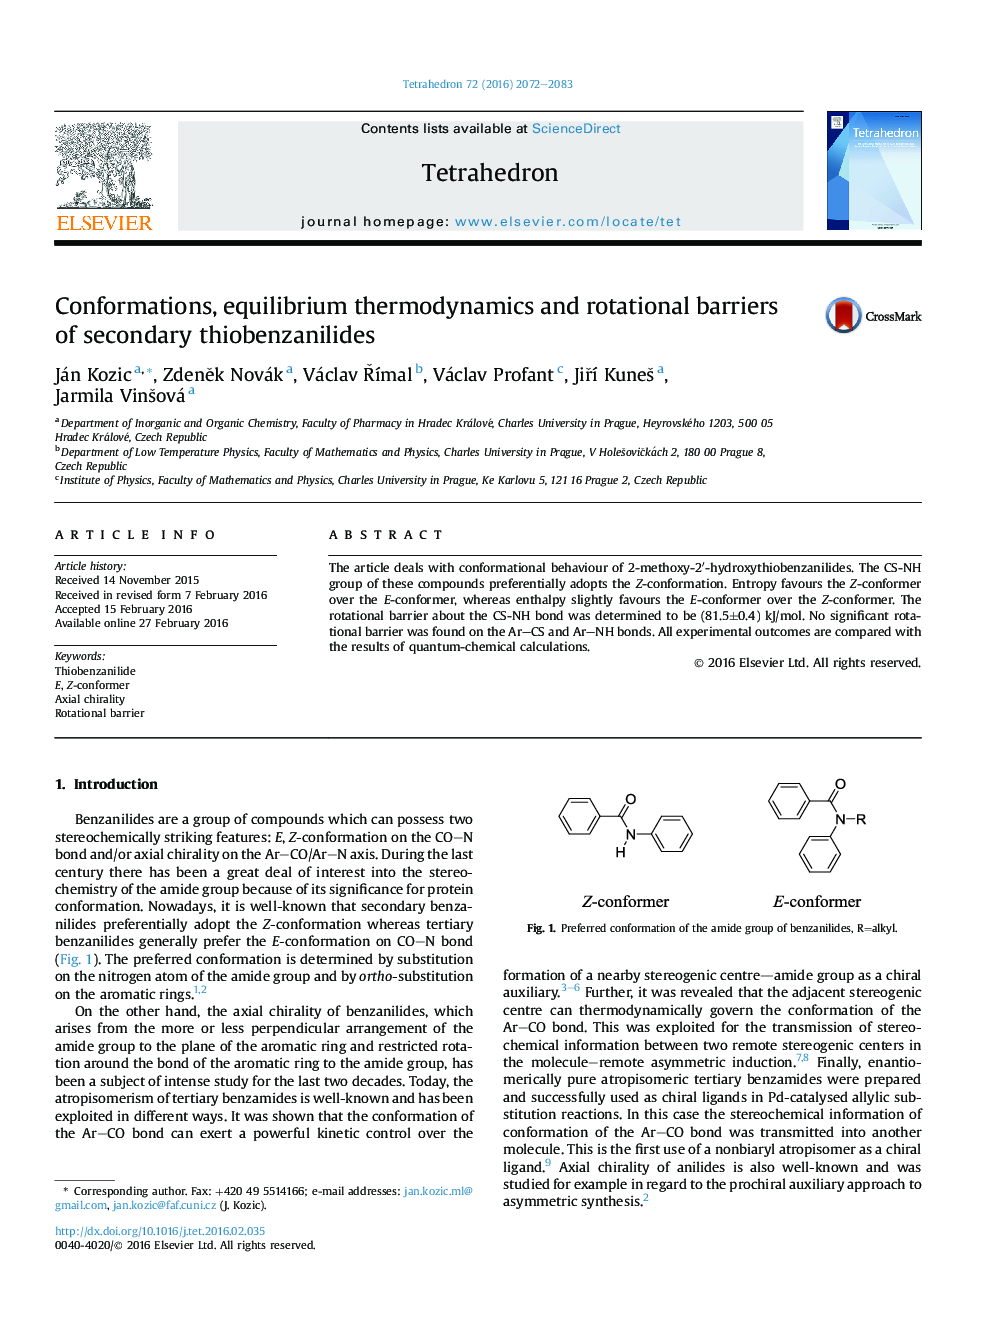 Conformations, equilibrium thermodynamics and rotational barriers of secondary thiobenzanilides